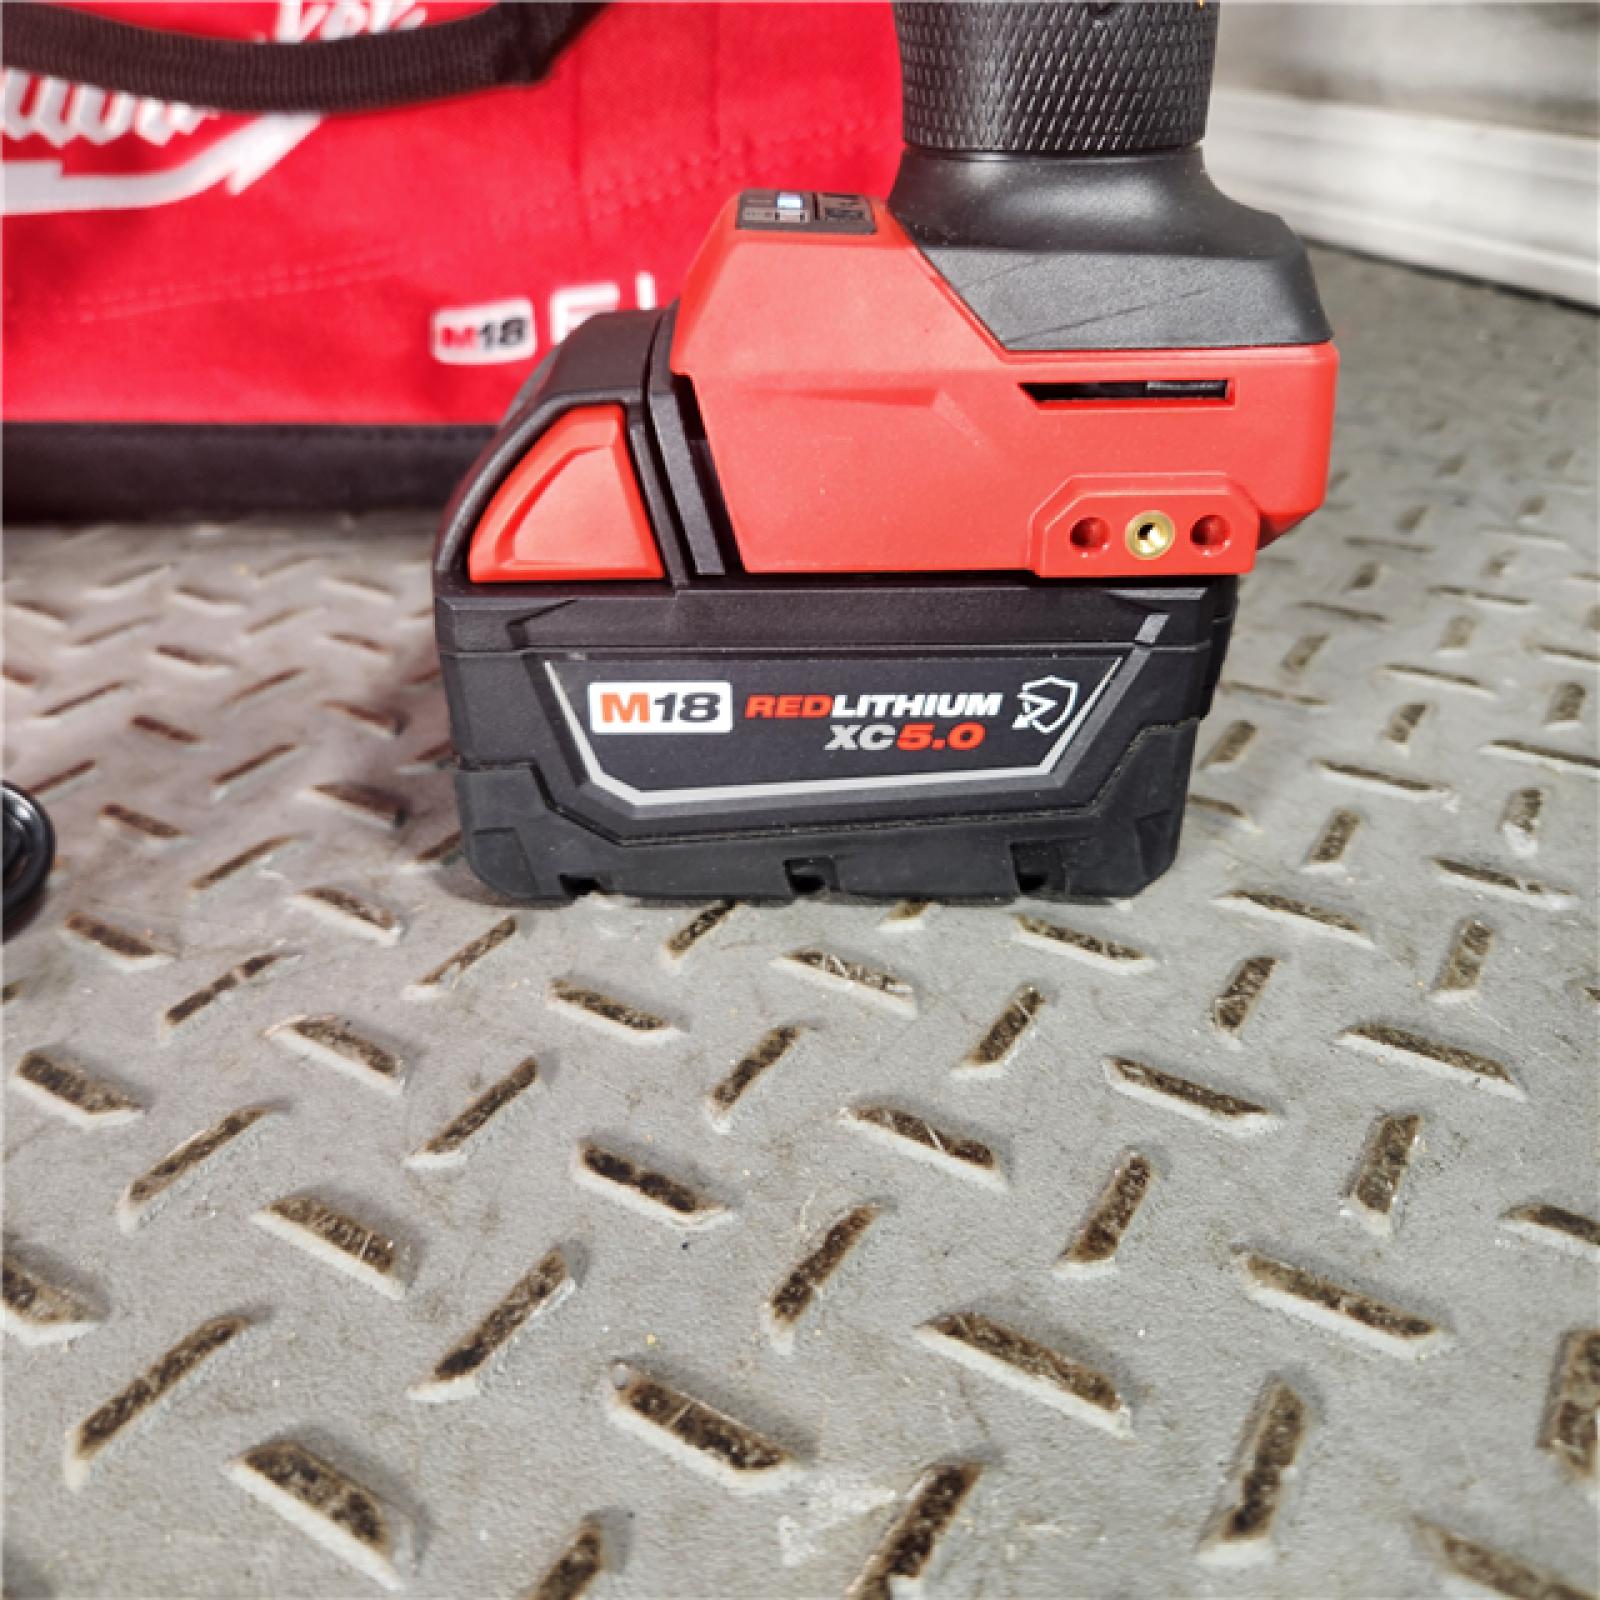 Houston Location - As-Is Milwaukee 2967-21B 18V M18 FUEL 1/2 Brushless Cordless High Torque Wrench W/ Friction Ring Kit 5.0 Ah - Appears IN LIKE NEW Condition